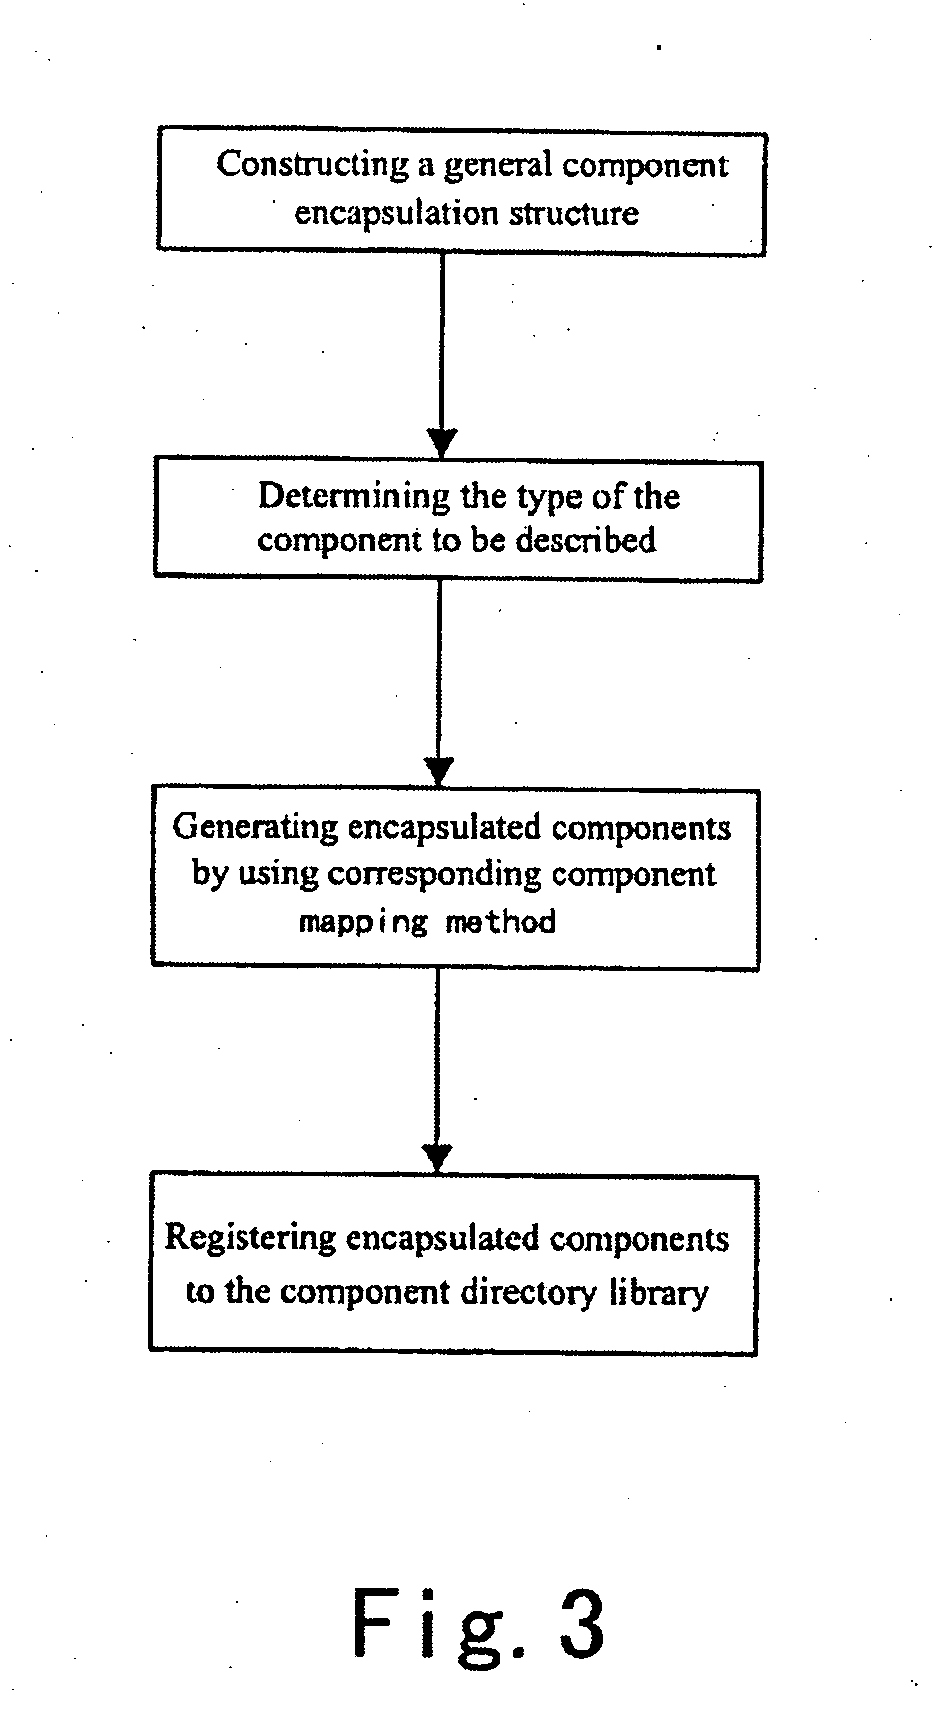 Encapsulation and unified access scheme for components